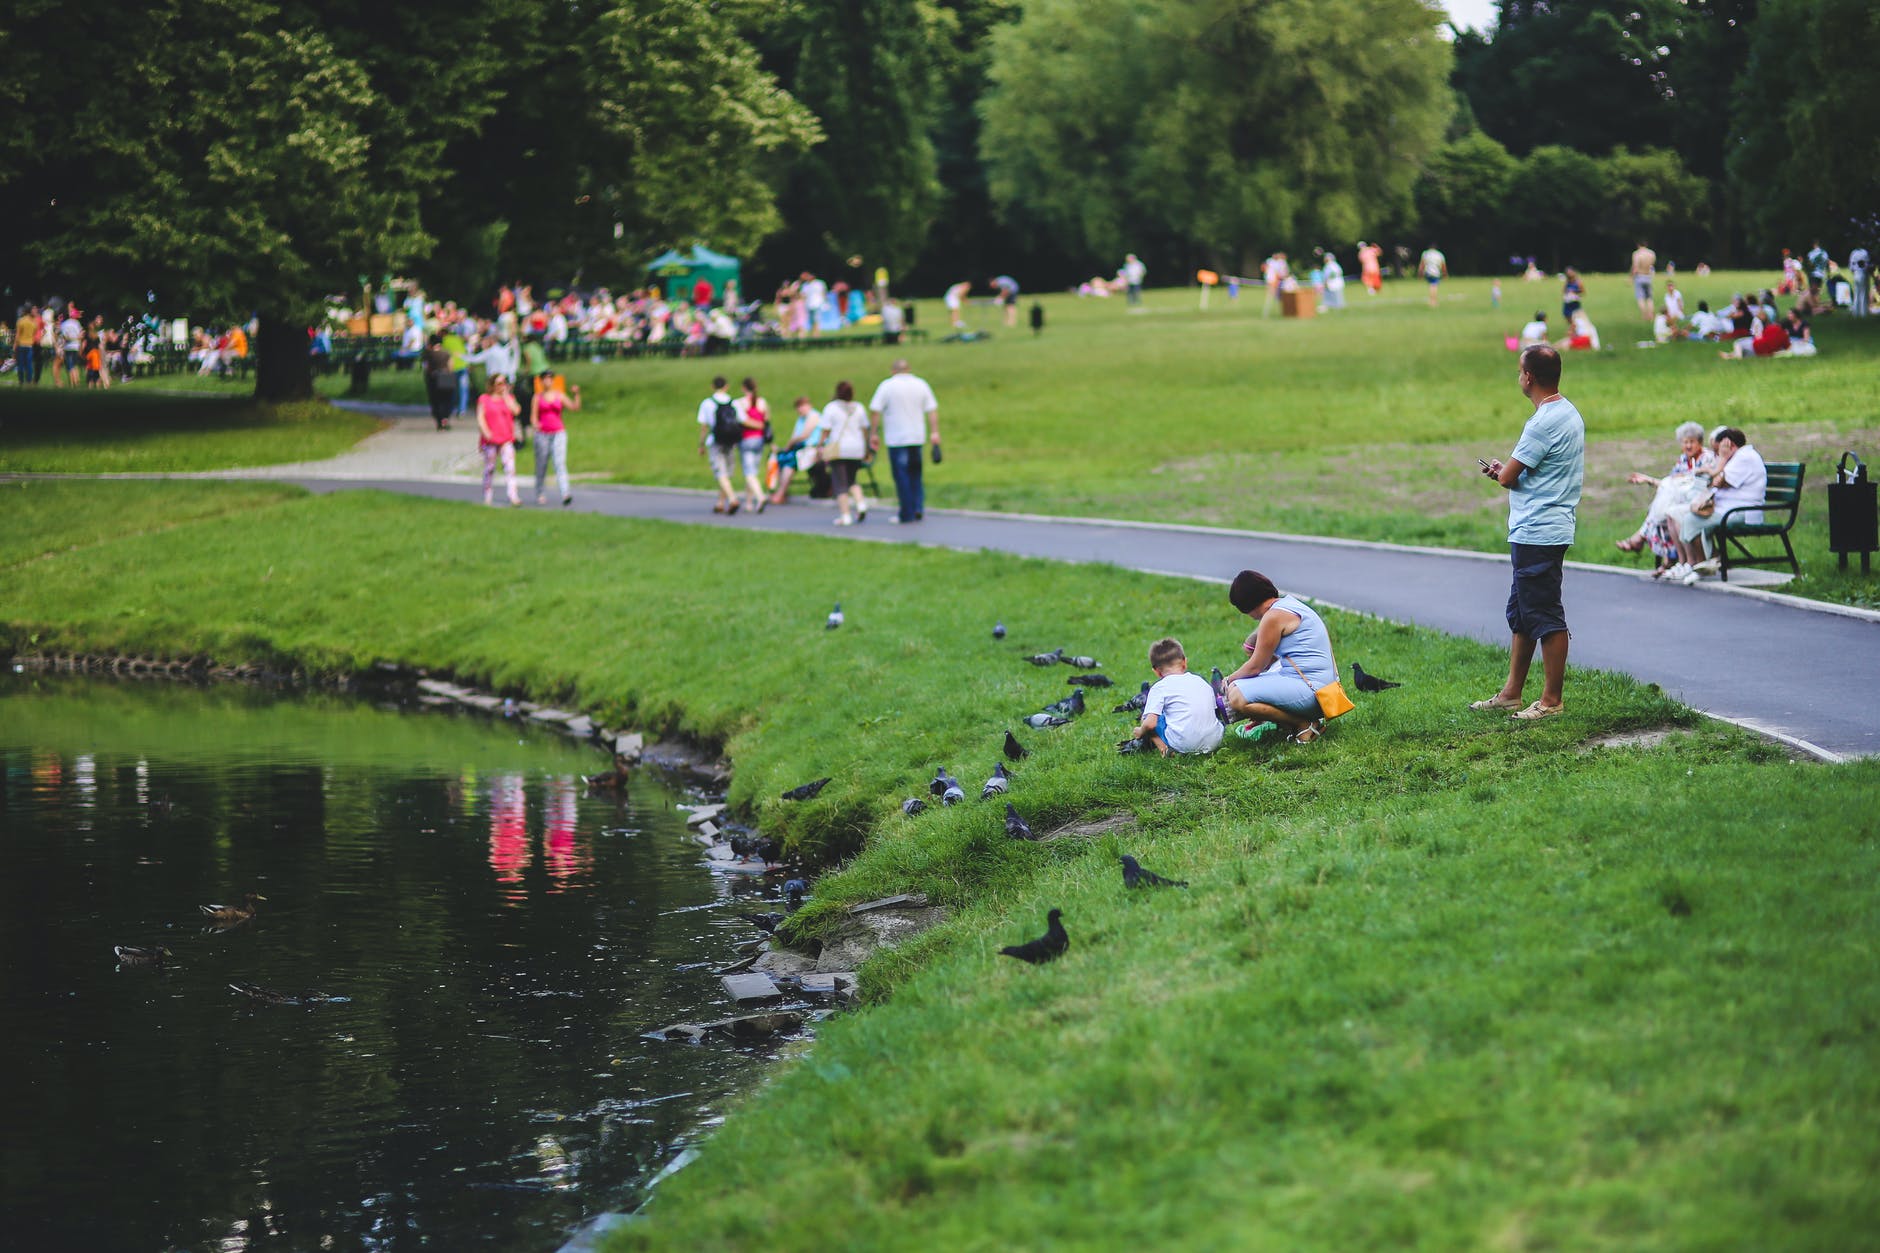 Arthur's parks were enjoyed by everyone, and Paul had to do something. | Source: Pexels